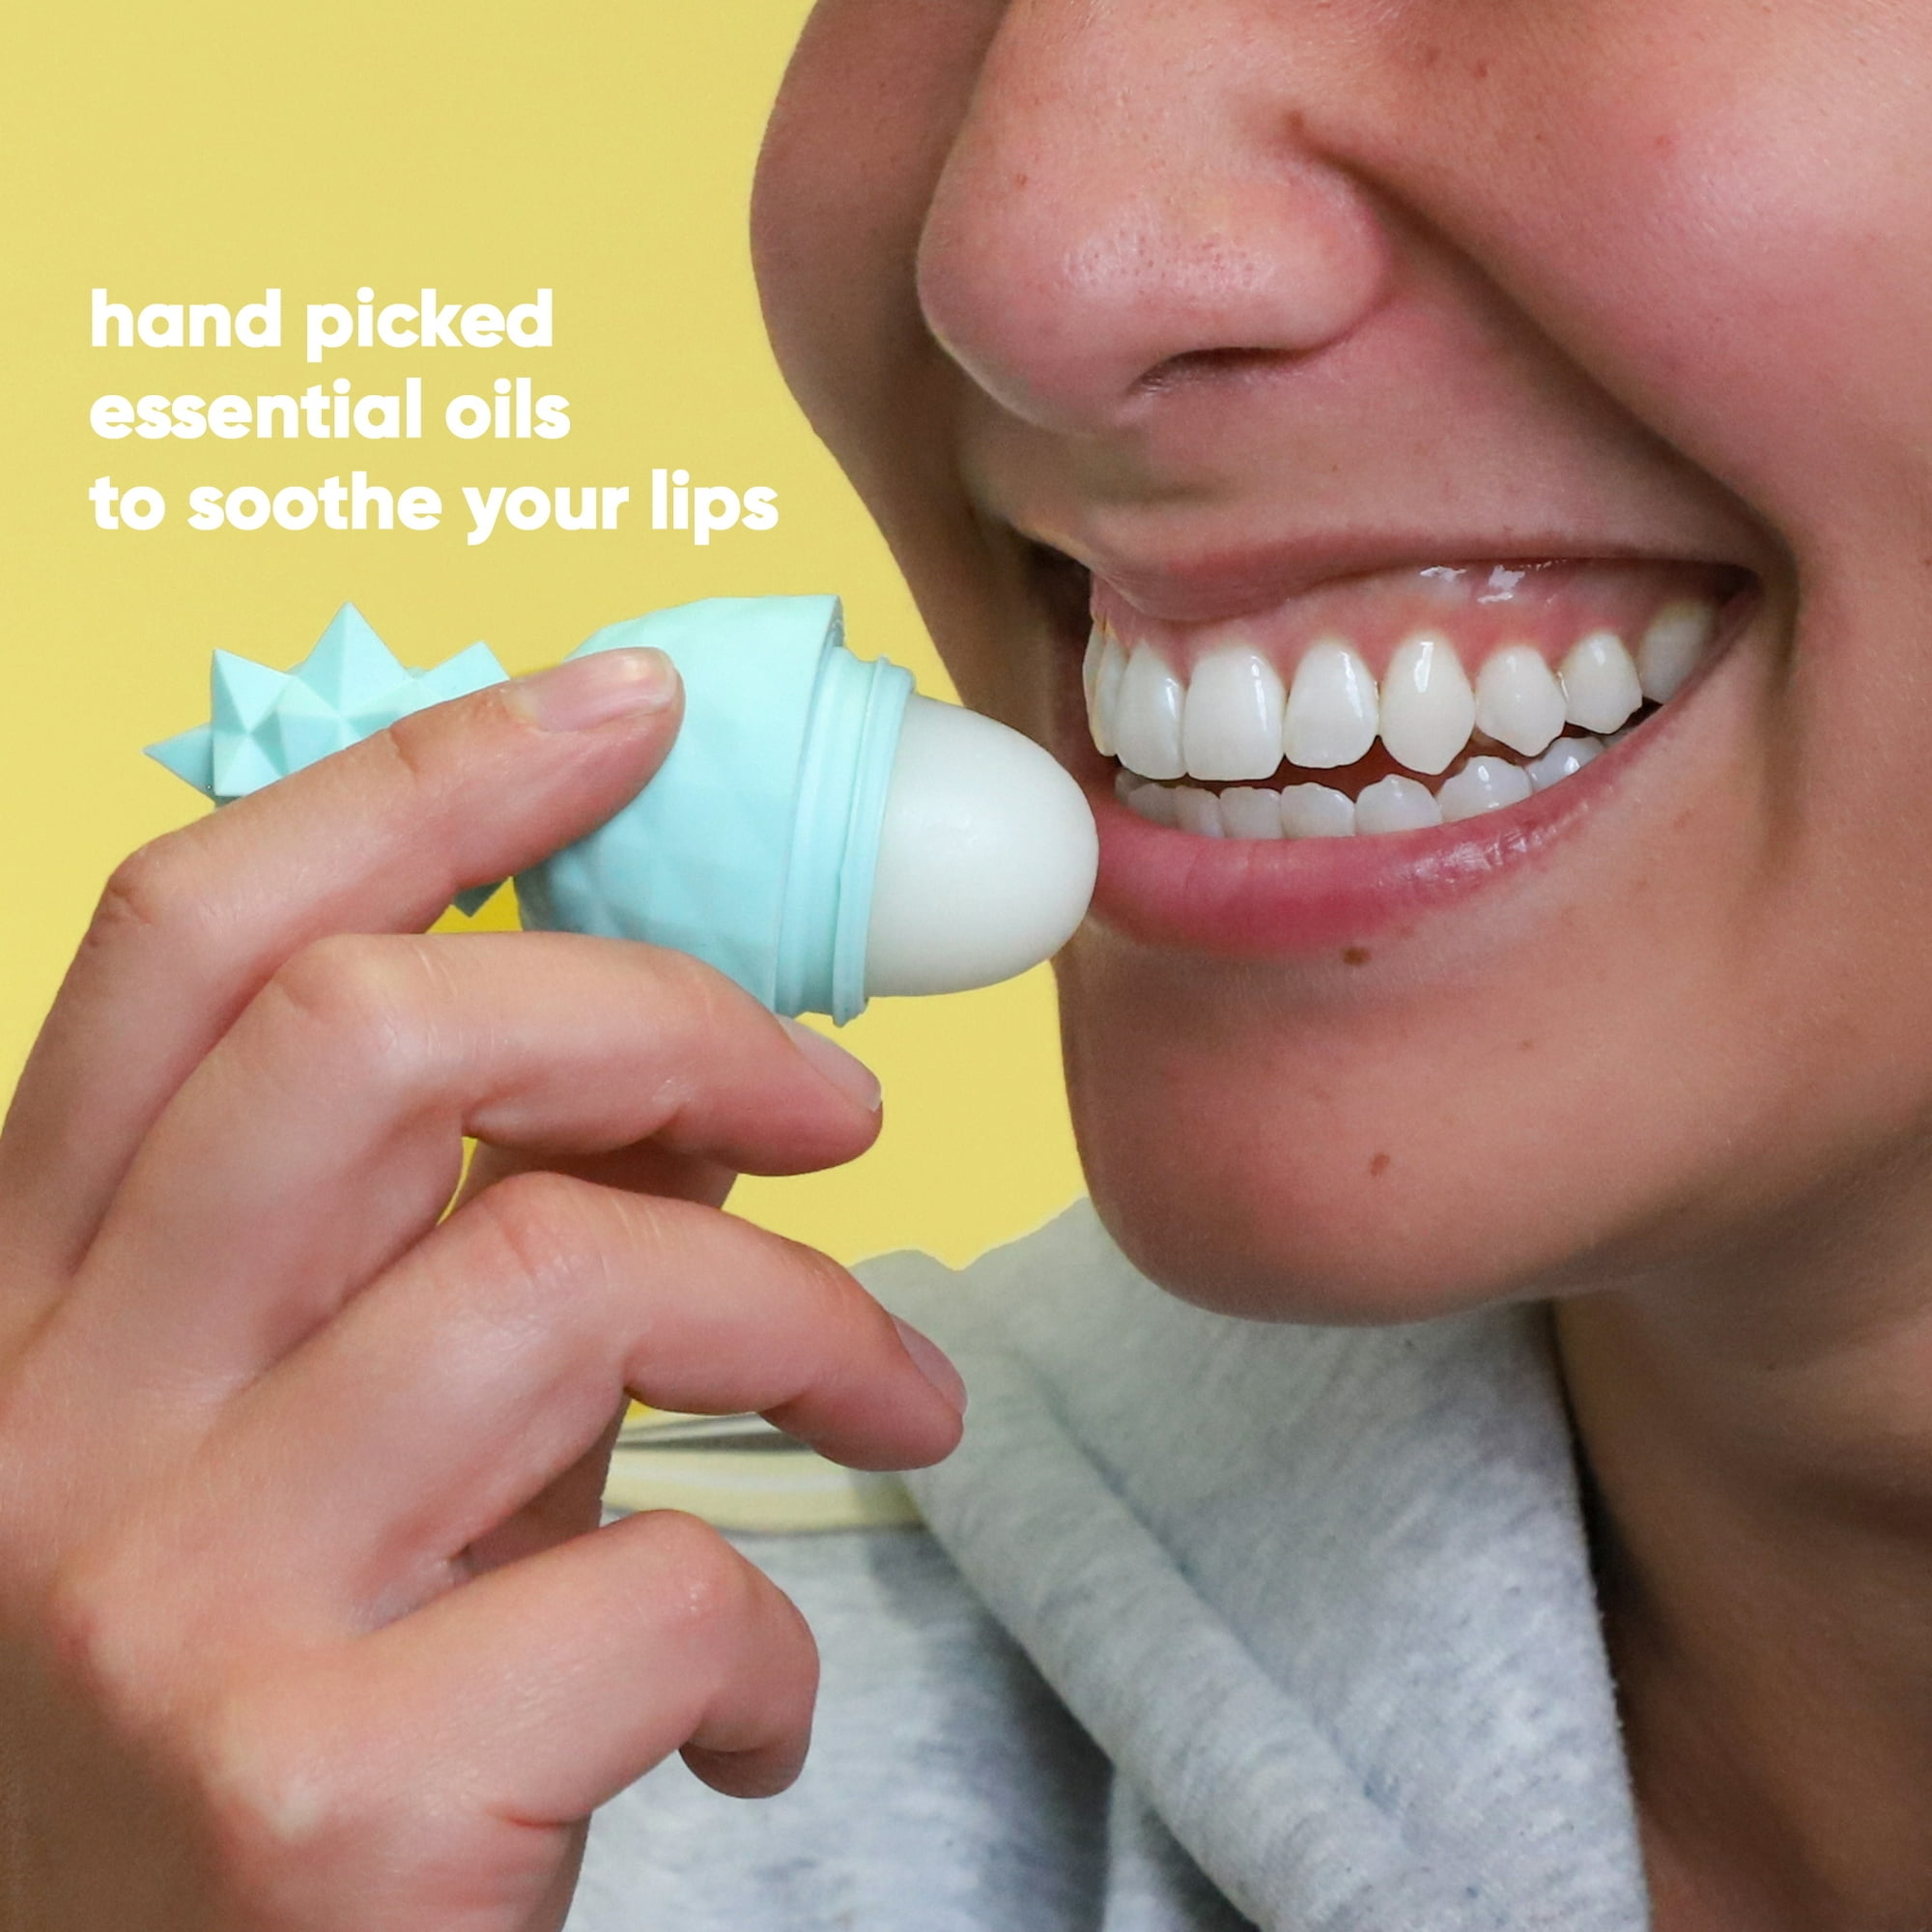 A person applying a green pineapple shaped lip balm